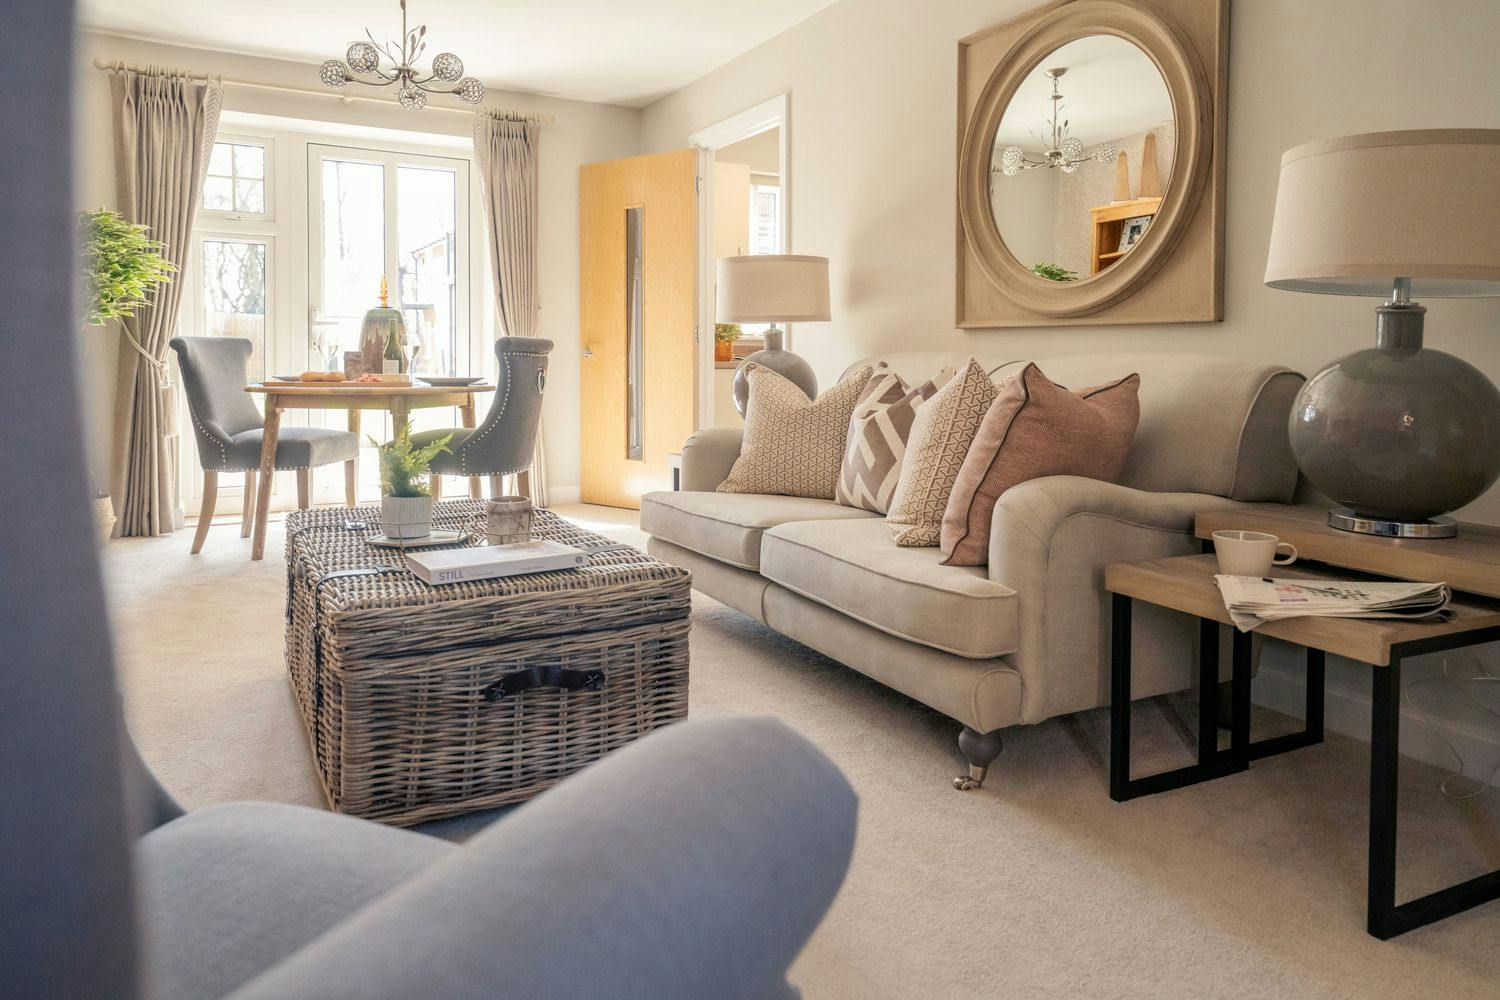 Living Room at Imber Court Retirement Development in Warminster, Wiltshire